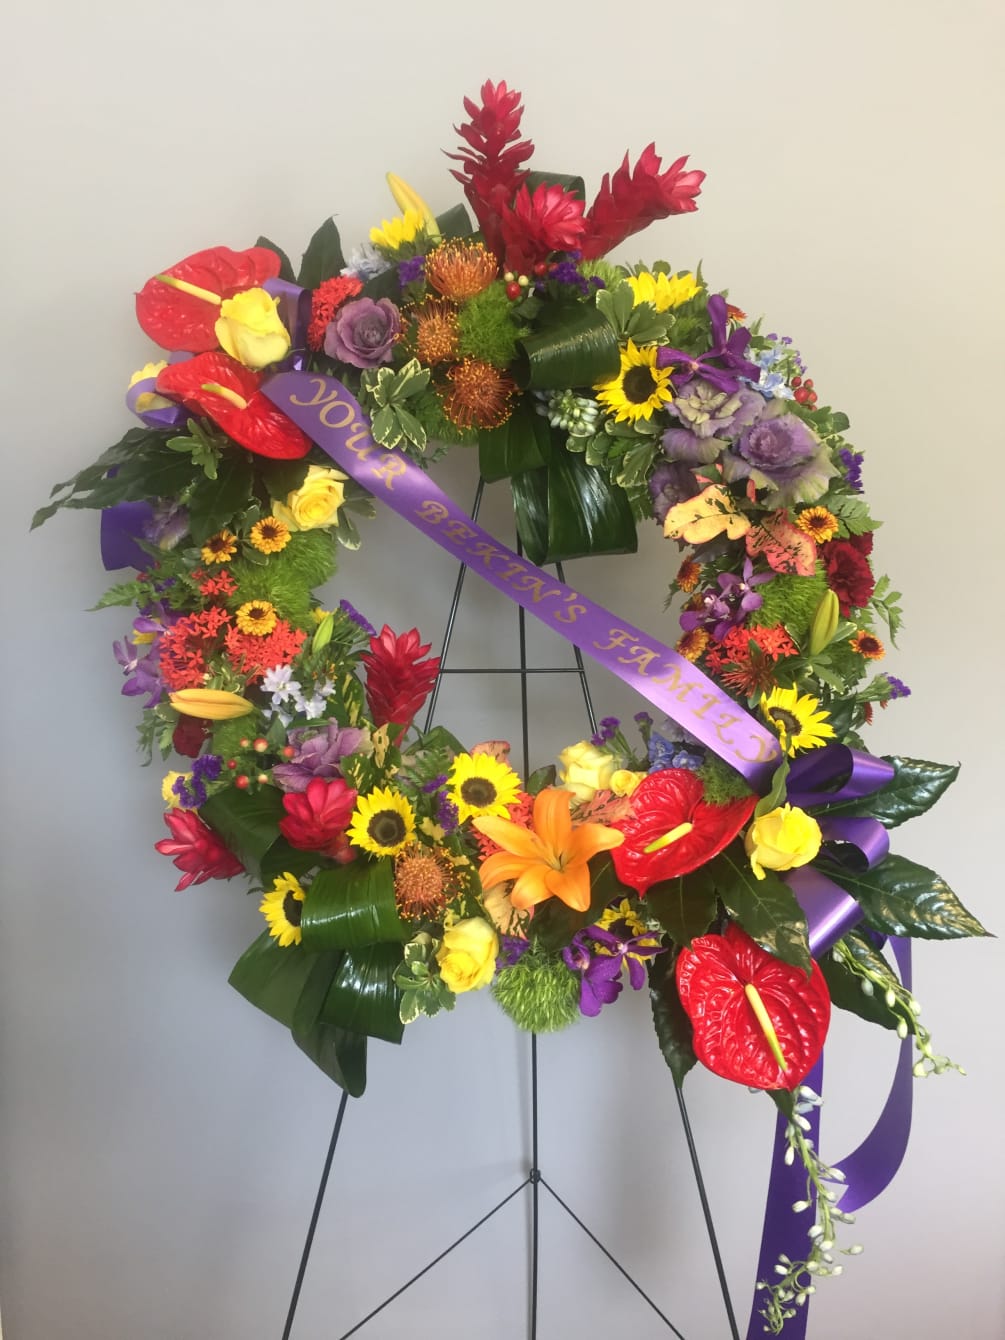 Tropical Sympathy Wreath is made with some anthuriums, ginger, pincushions, lilies, sunflowers